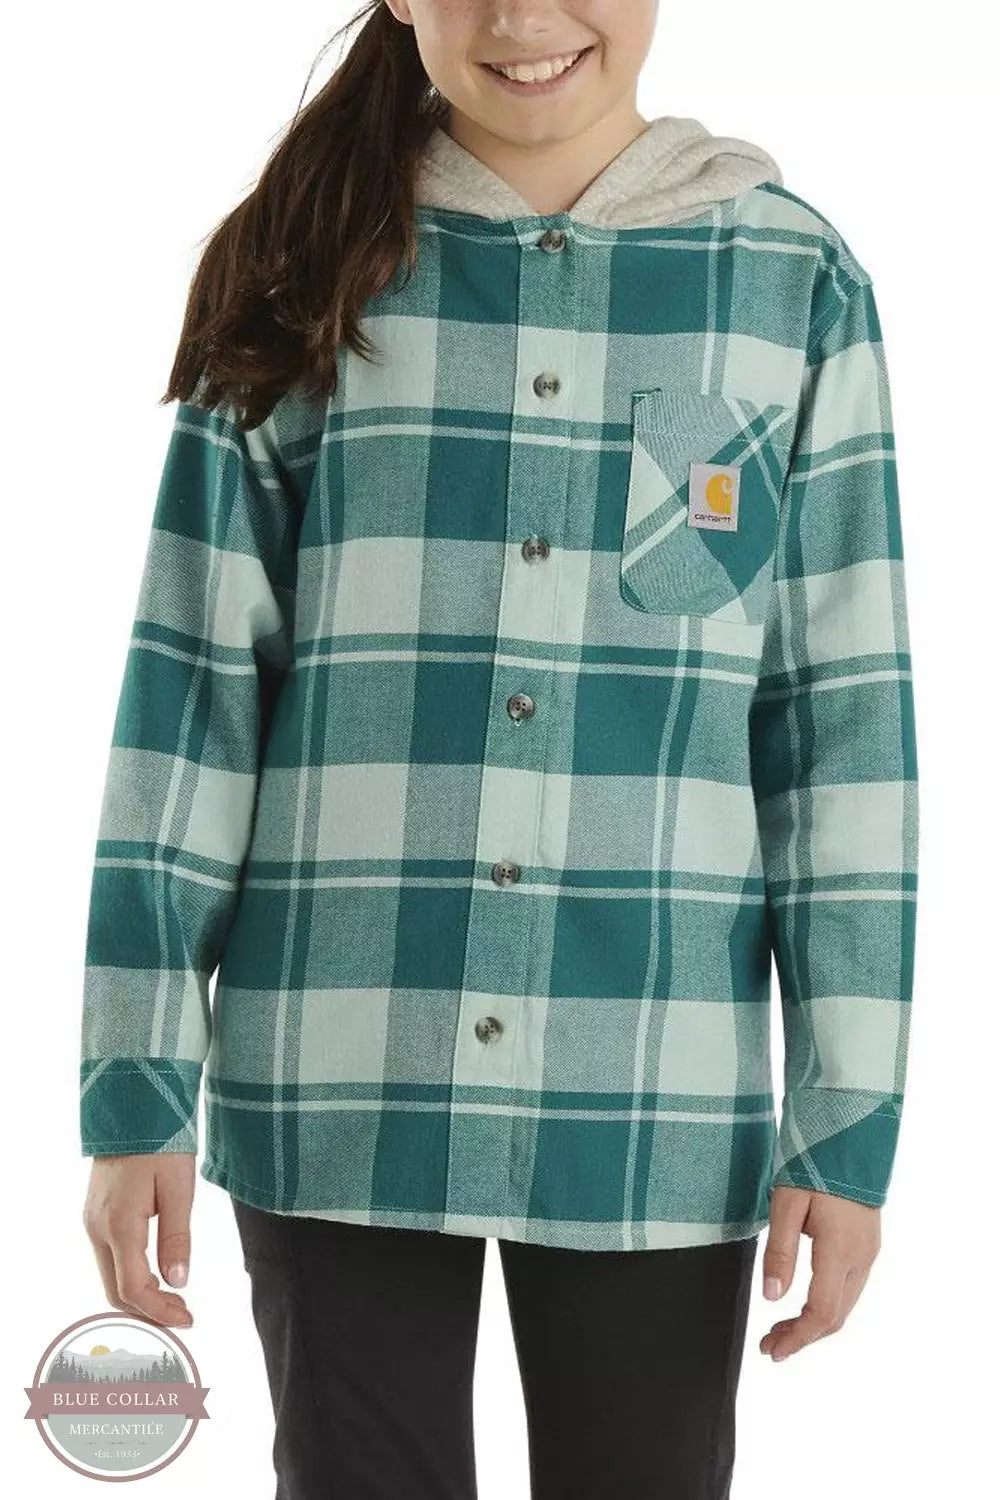 Carhartt CE9148-A180 Long Sleeve Flannel Button Front Hooded Shirt in Pastel Turquoise Front View